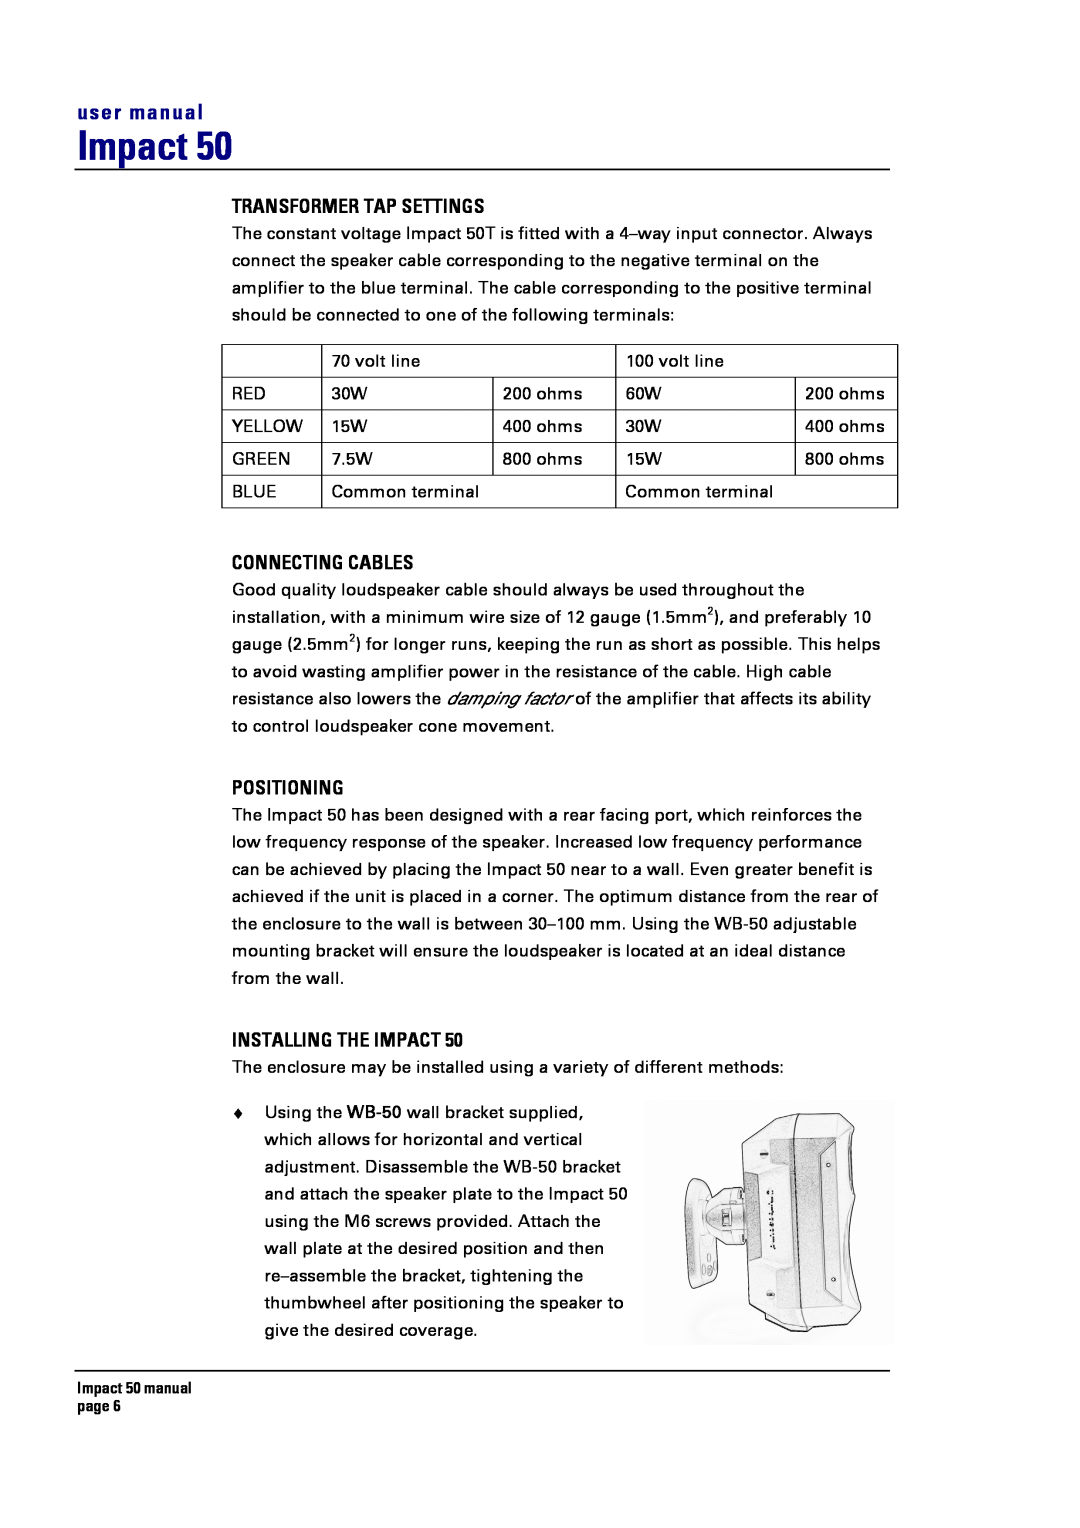 Turbosound 50T user manual Transformer Tap Settings, Connecting Cables, Positioning, Installing The Impact 